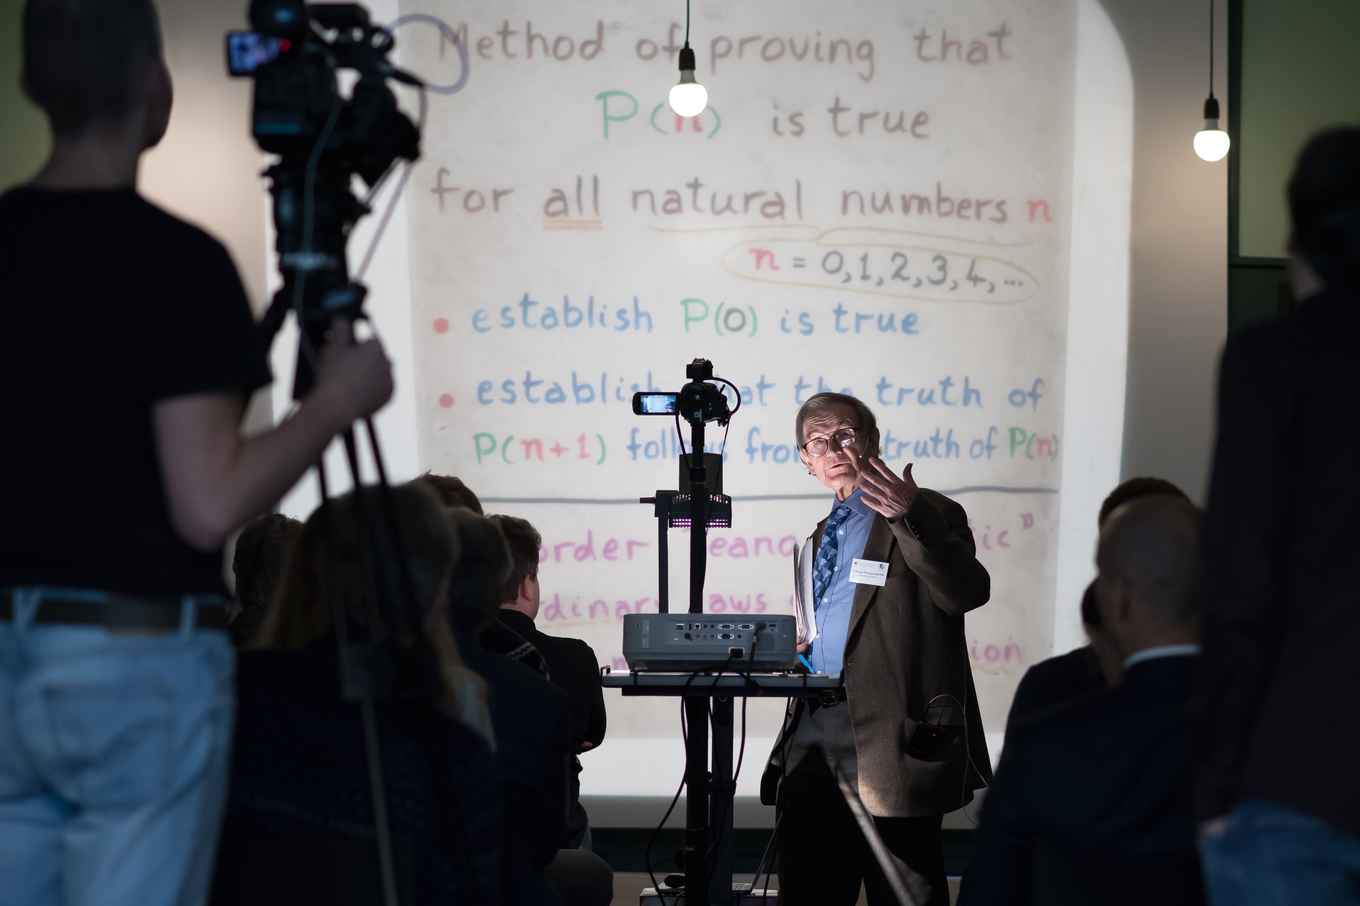 Sir Roger Penrose speaking at the IAS, 22 January 2019